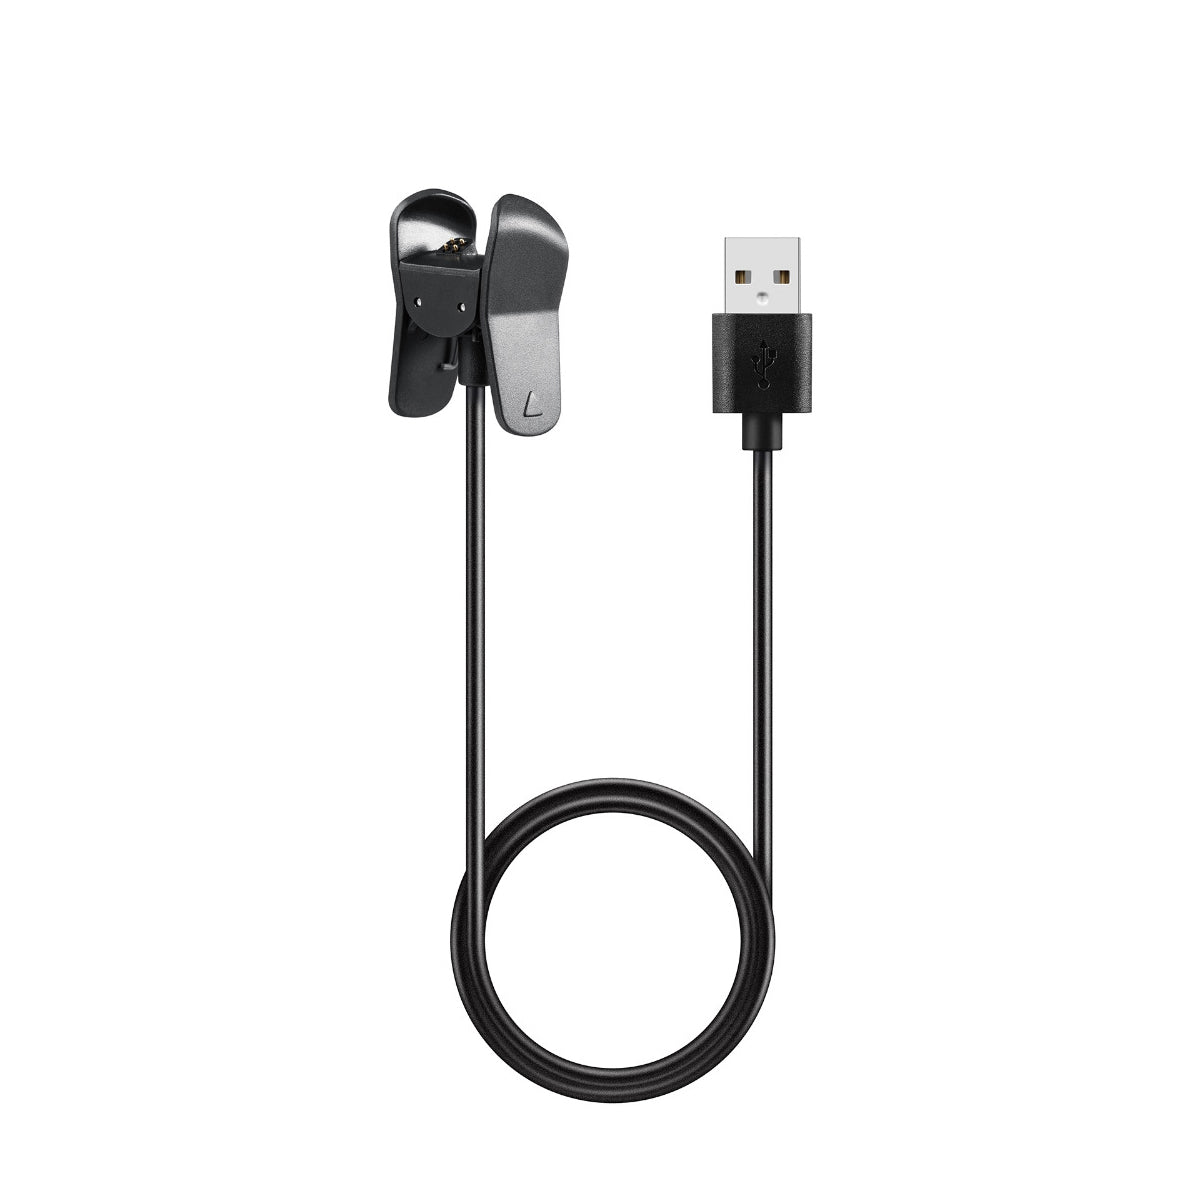 Garmin Vivoactive 4 Charger Replacement Charging Charge Cable Cord USB  (Black)